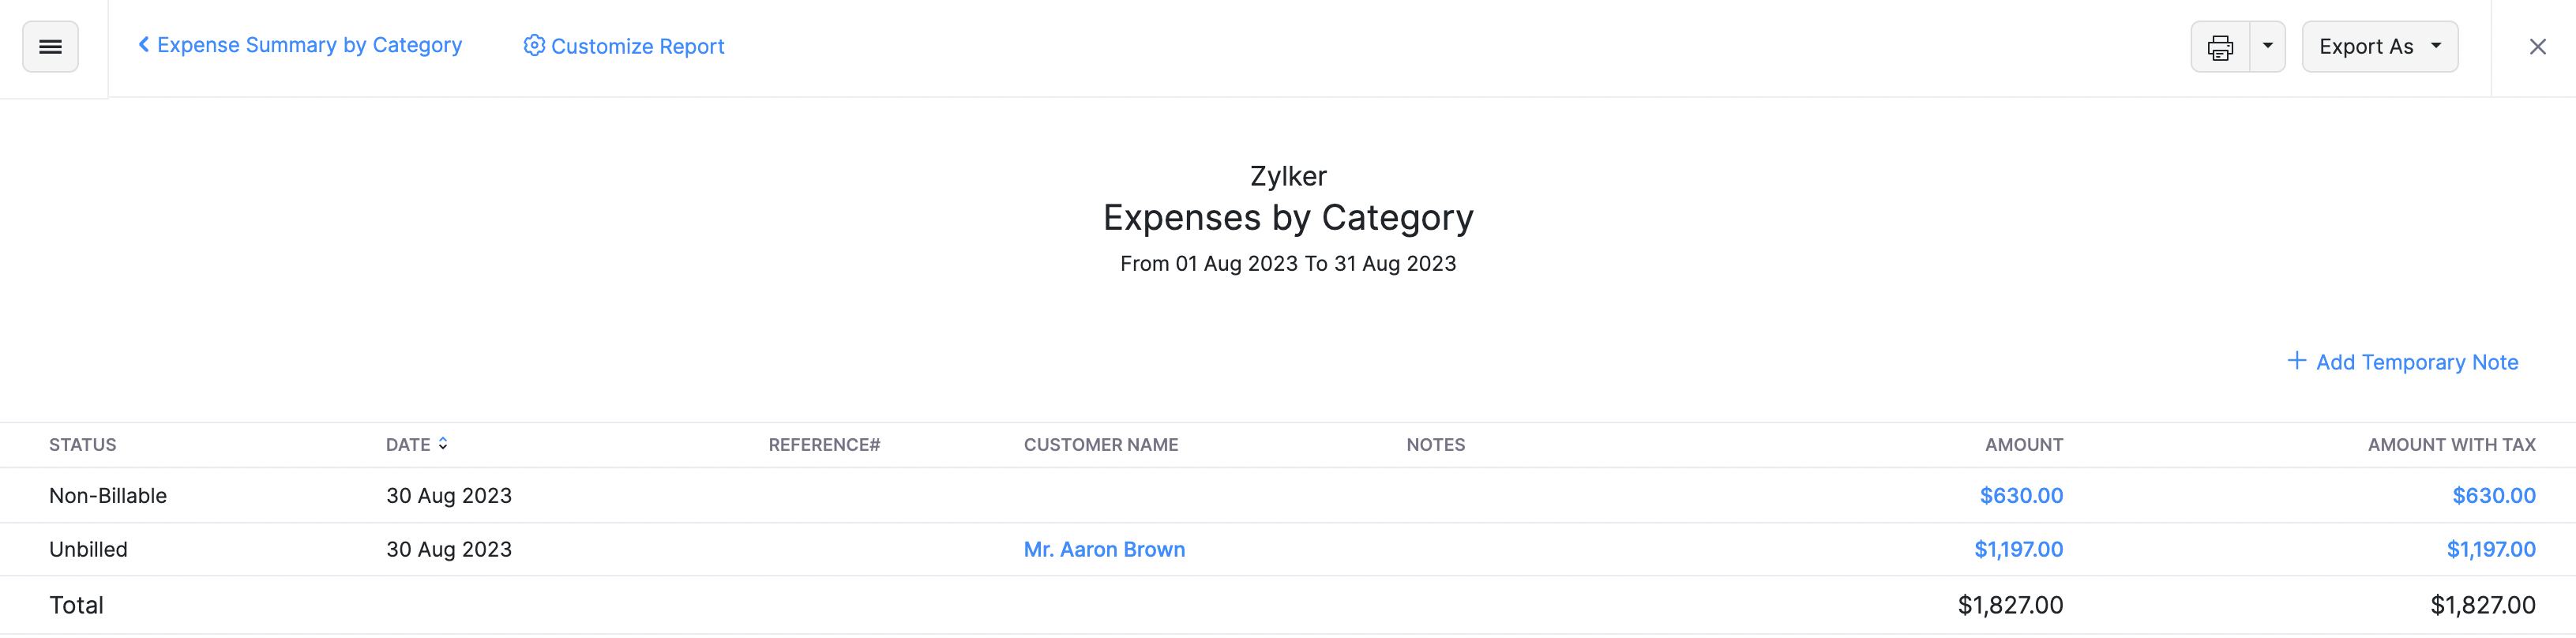 Expense by Category Report 2